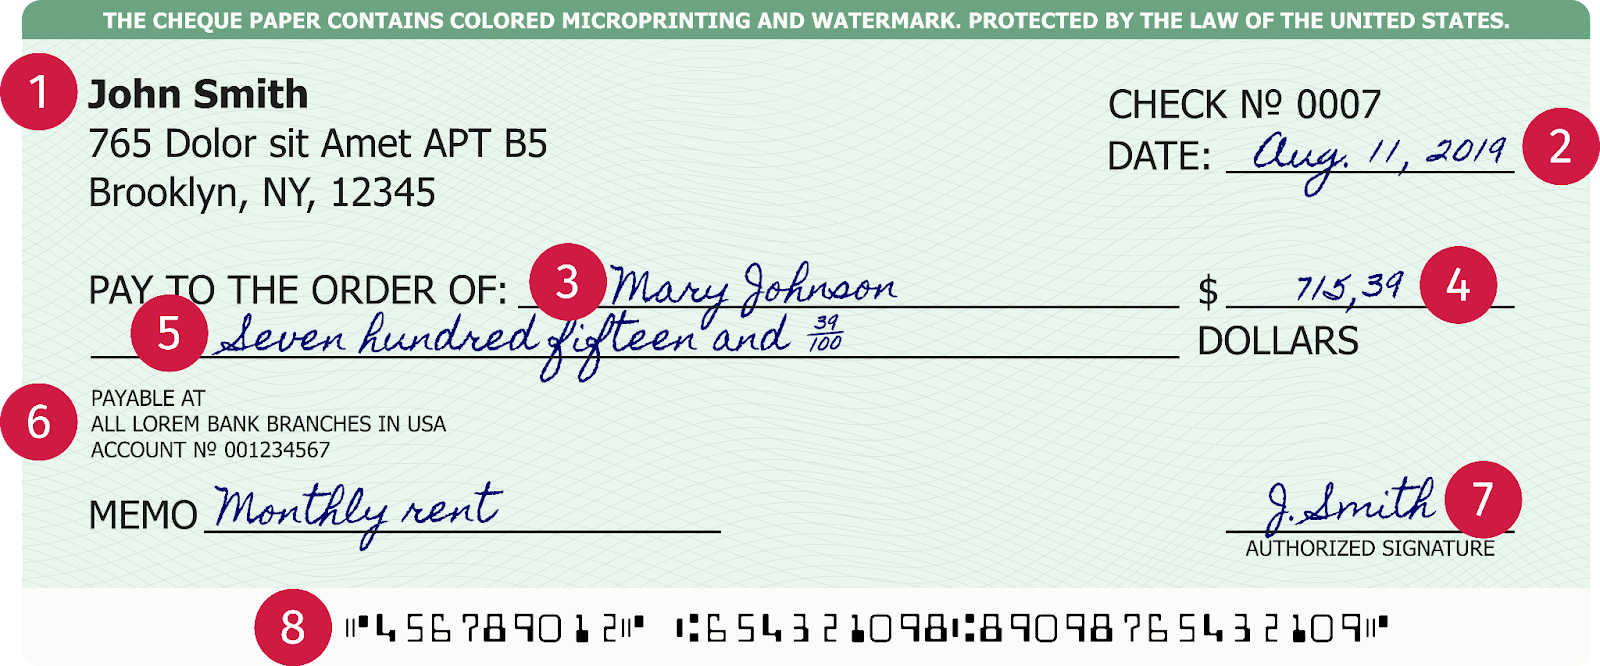 Information typically found on a check